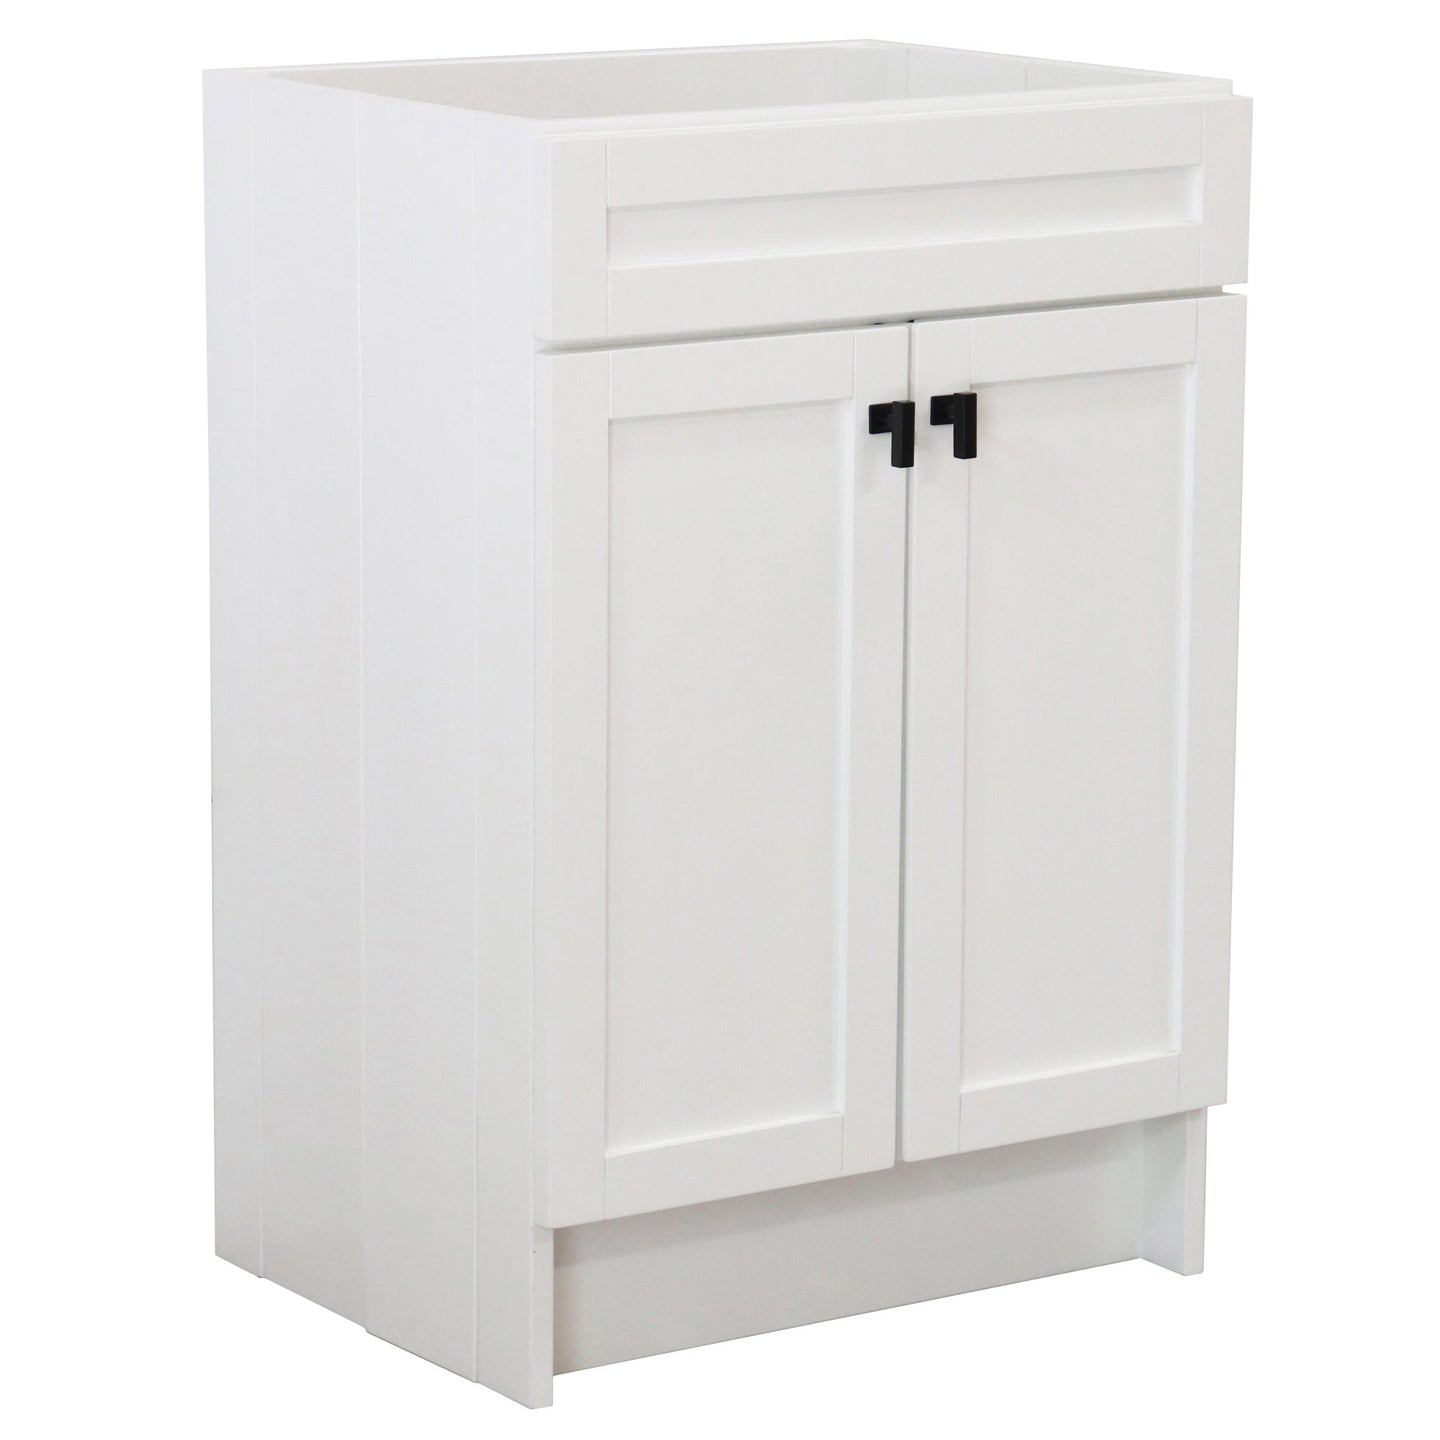 White 23 in. Single Sink Foldable Vanity Cabinet with matte black Hardware finish